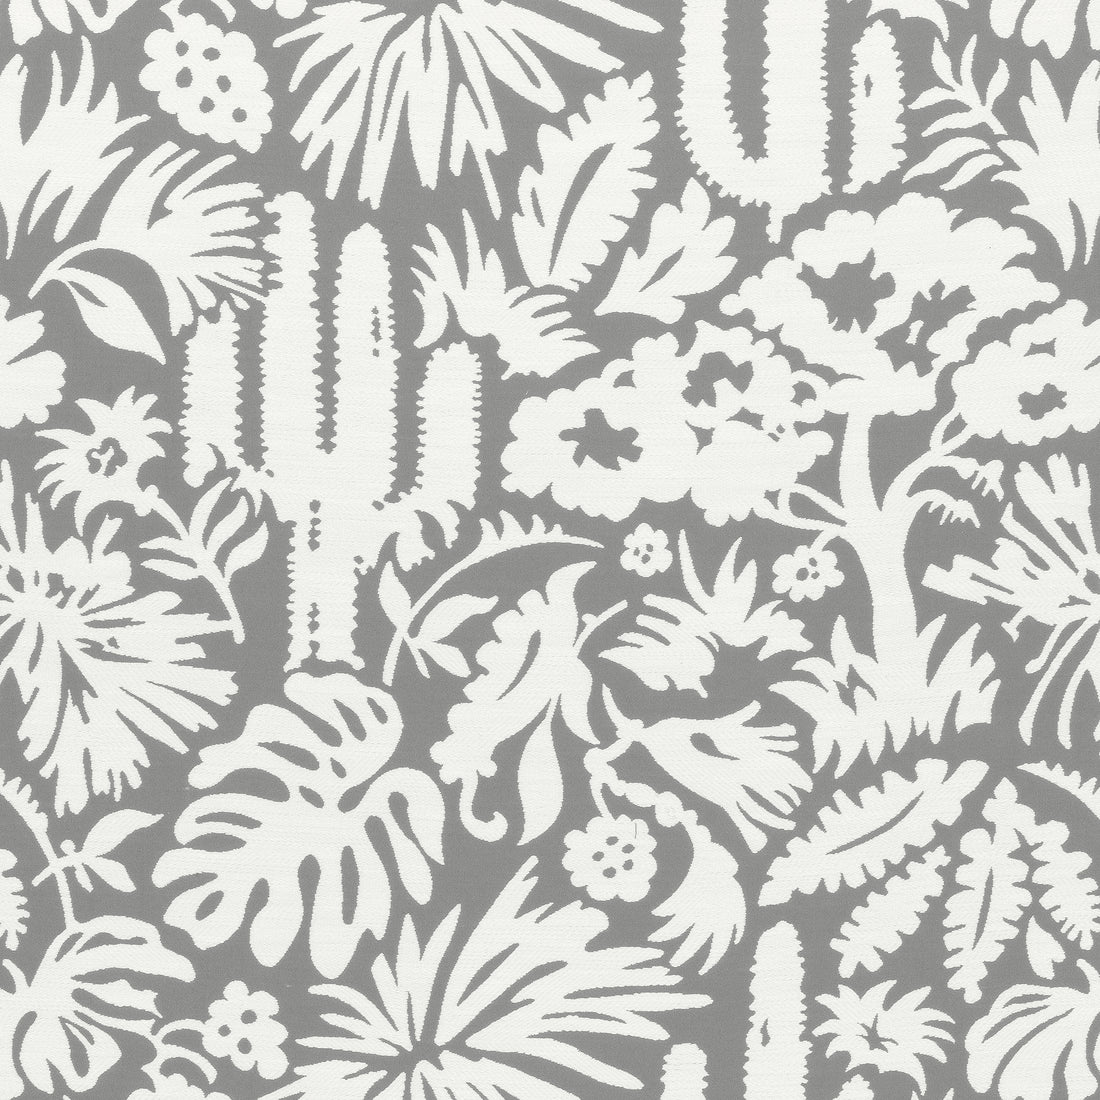 Botanica fabric in nickel color - pattern number W74624 - by Thibaut in the Festival collection